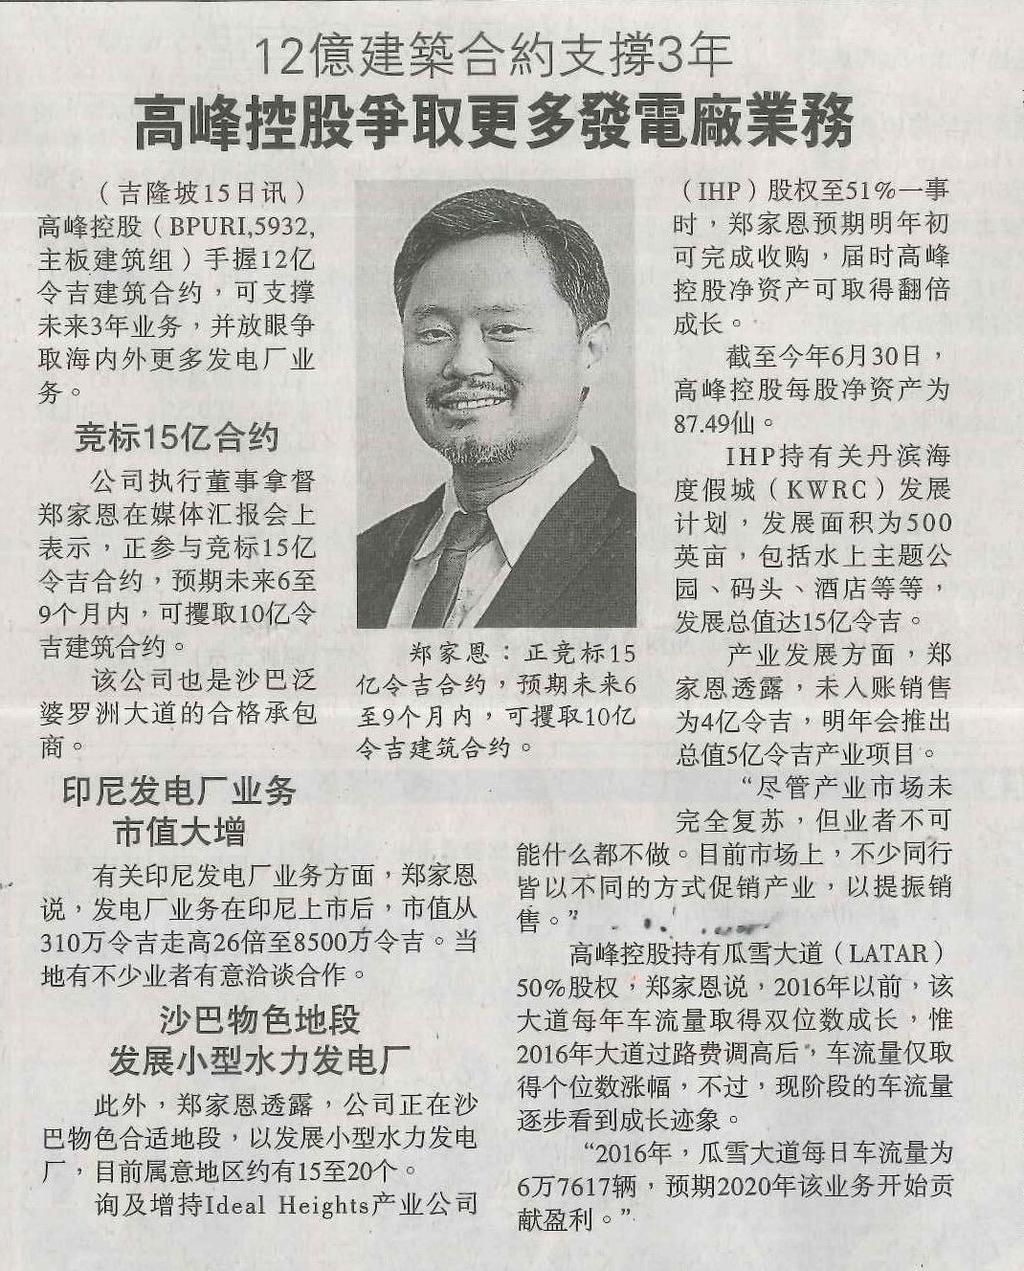 Newspaper : Sin Chew Daily Title : BinaPuri to secures more